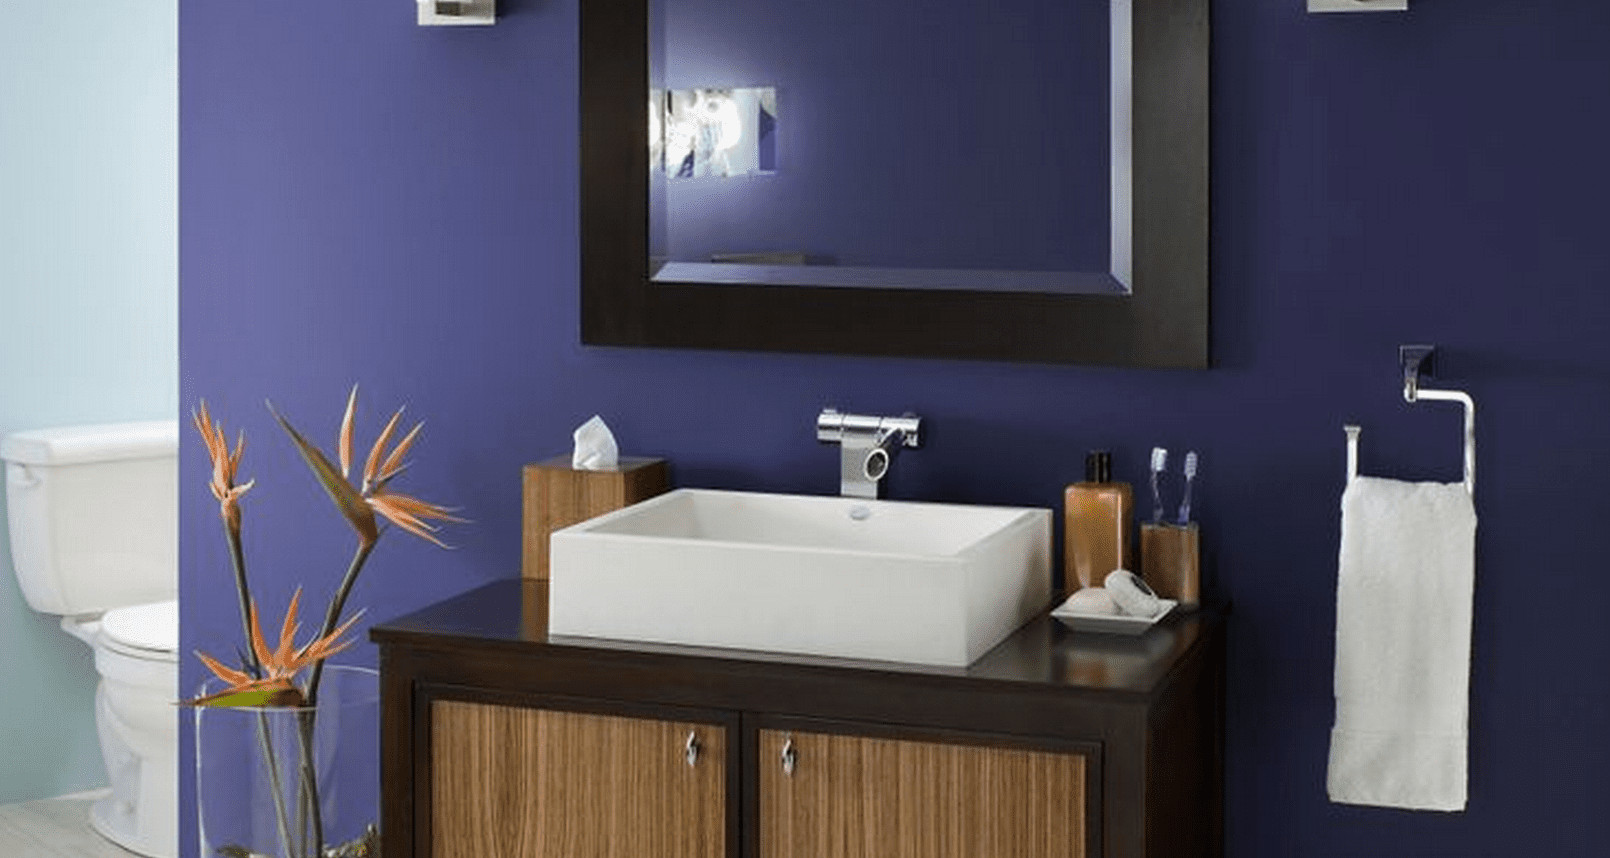 Paint Colors For A Bathroom
 The Best Paint Colors for a Small Bathroom